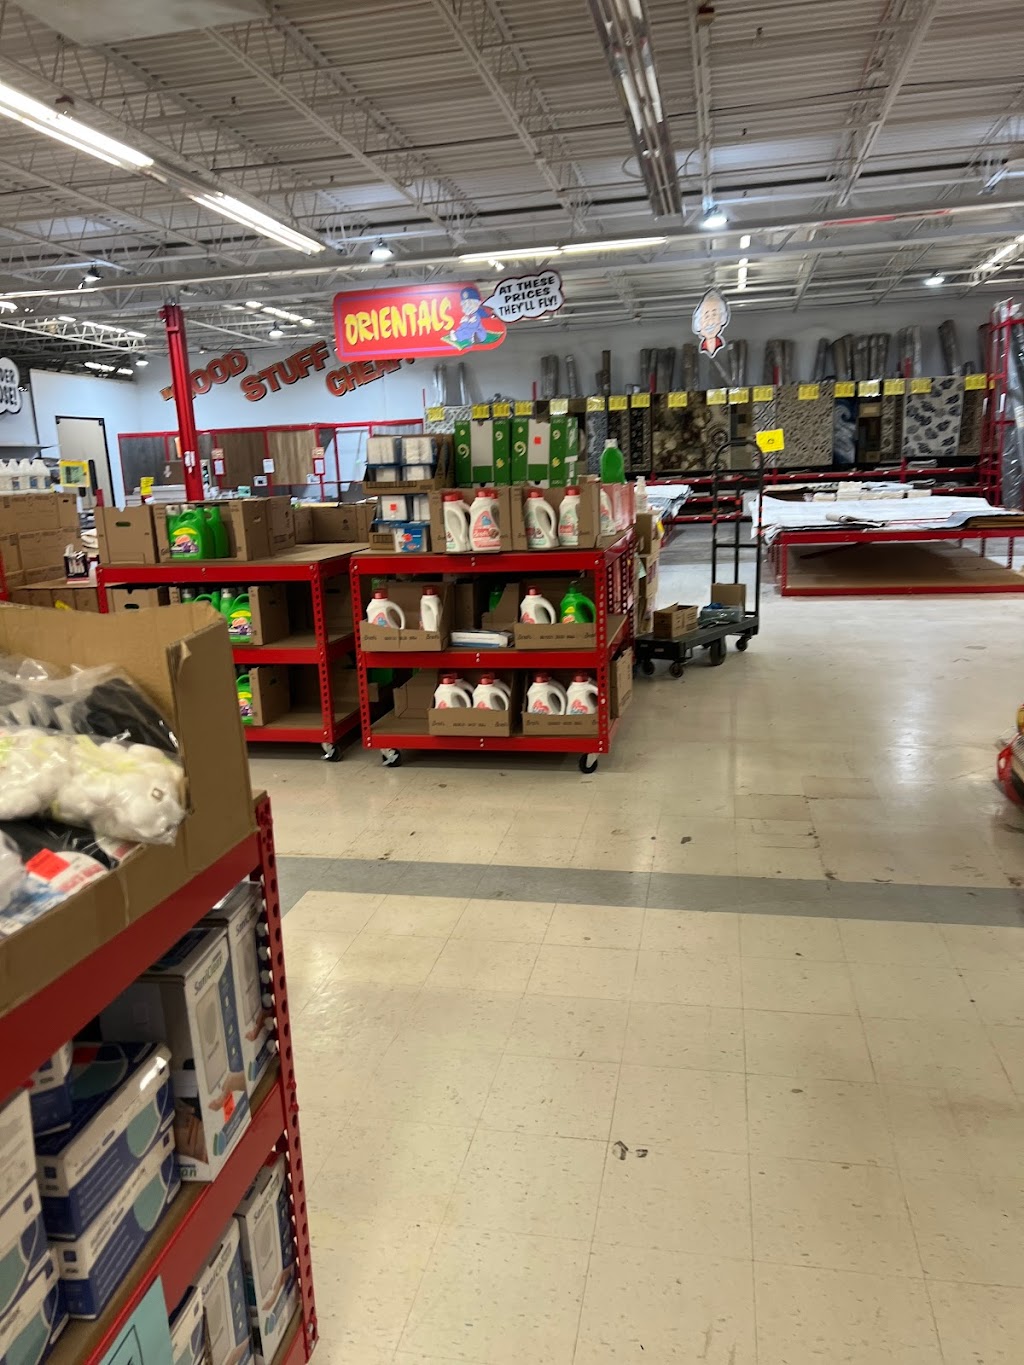 Ollies Bargain Outlet | 590 Howe Ave, Cuyahoga Falls, OH 44221, USA | Phone: (330) 920-4504